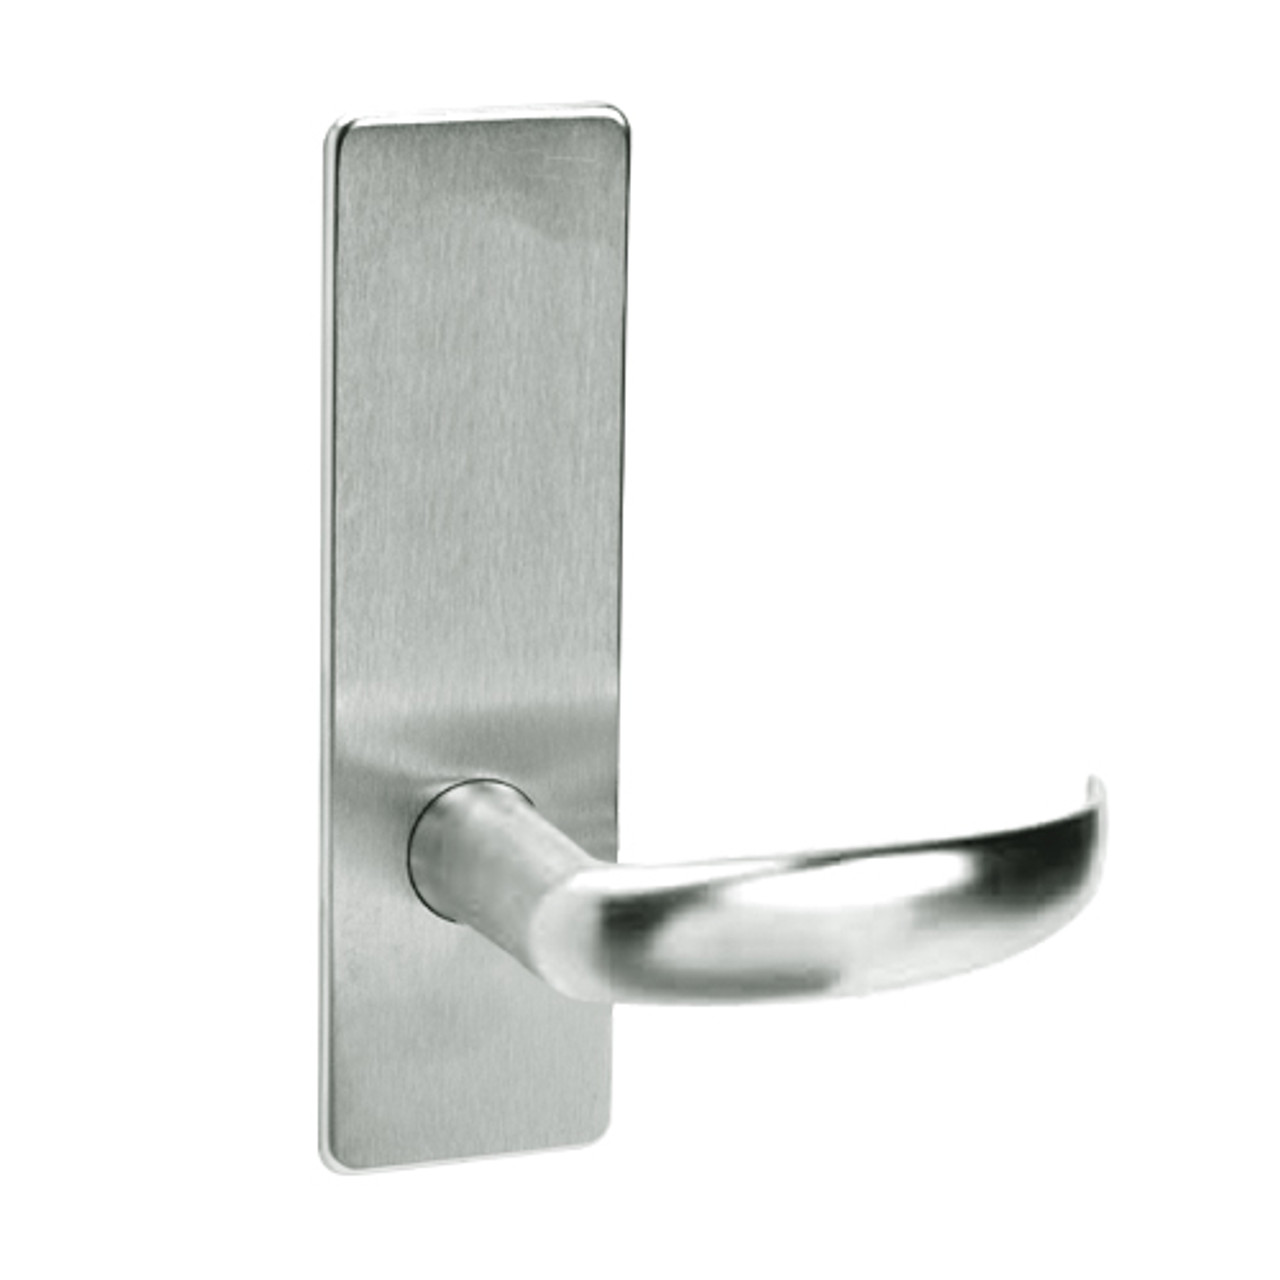 ML2030-PSP-618-M31 Corbin Russwin ML2000 Series Mortise Privacy Locksets with Princeton Lever in Bright Nickel